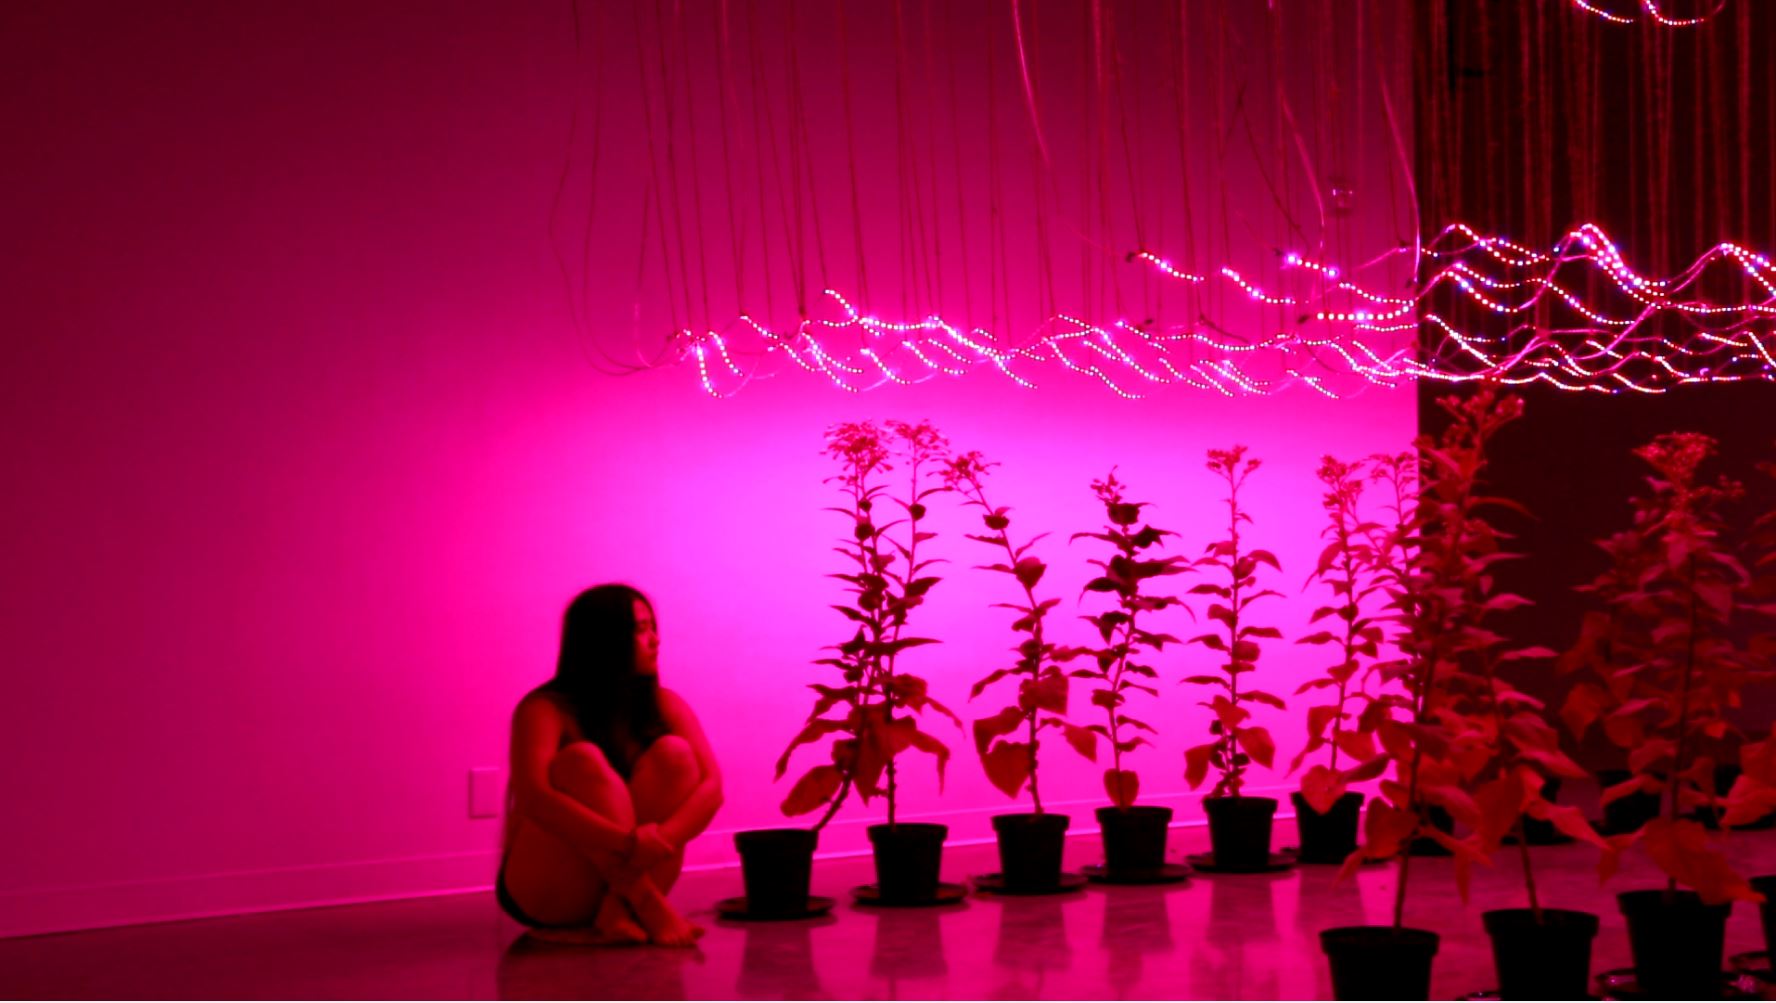 video still of a 2018 performance in the Politics of Weeds exhibition. The artist sits besides a row of plants in fluorescent pink lighting